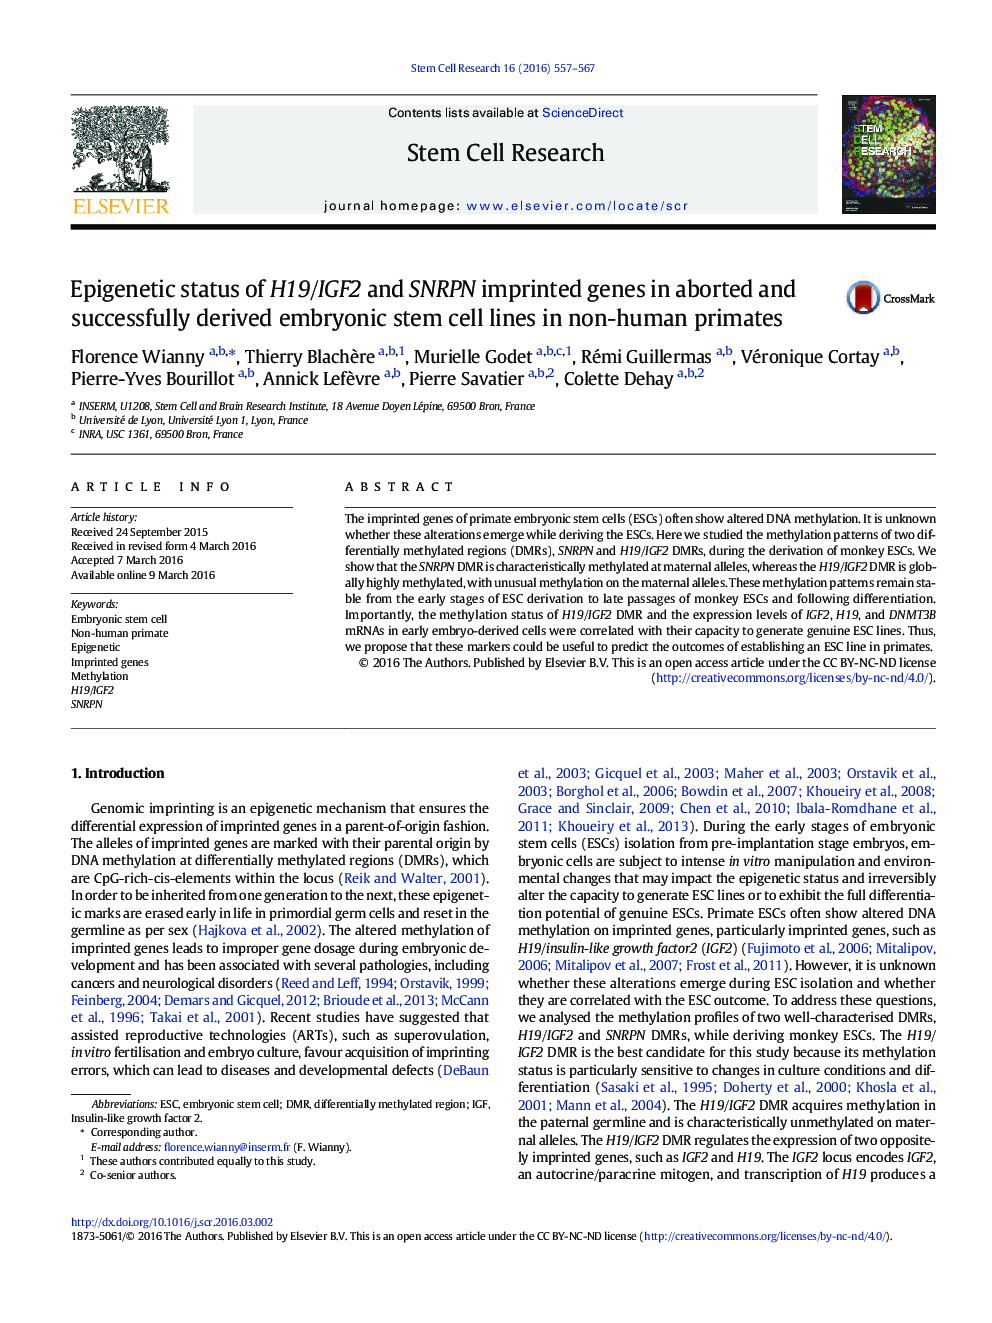 Epigenetic status of H19/IGF2 and SNRPN imprinted genes in aborted and successfully derived embryonic stem cell lines in non-human primates